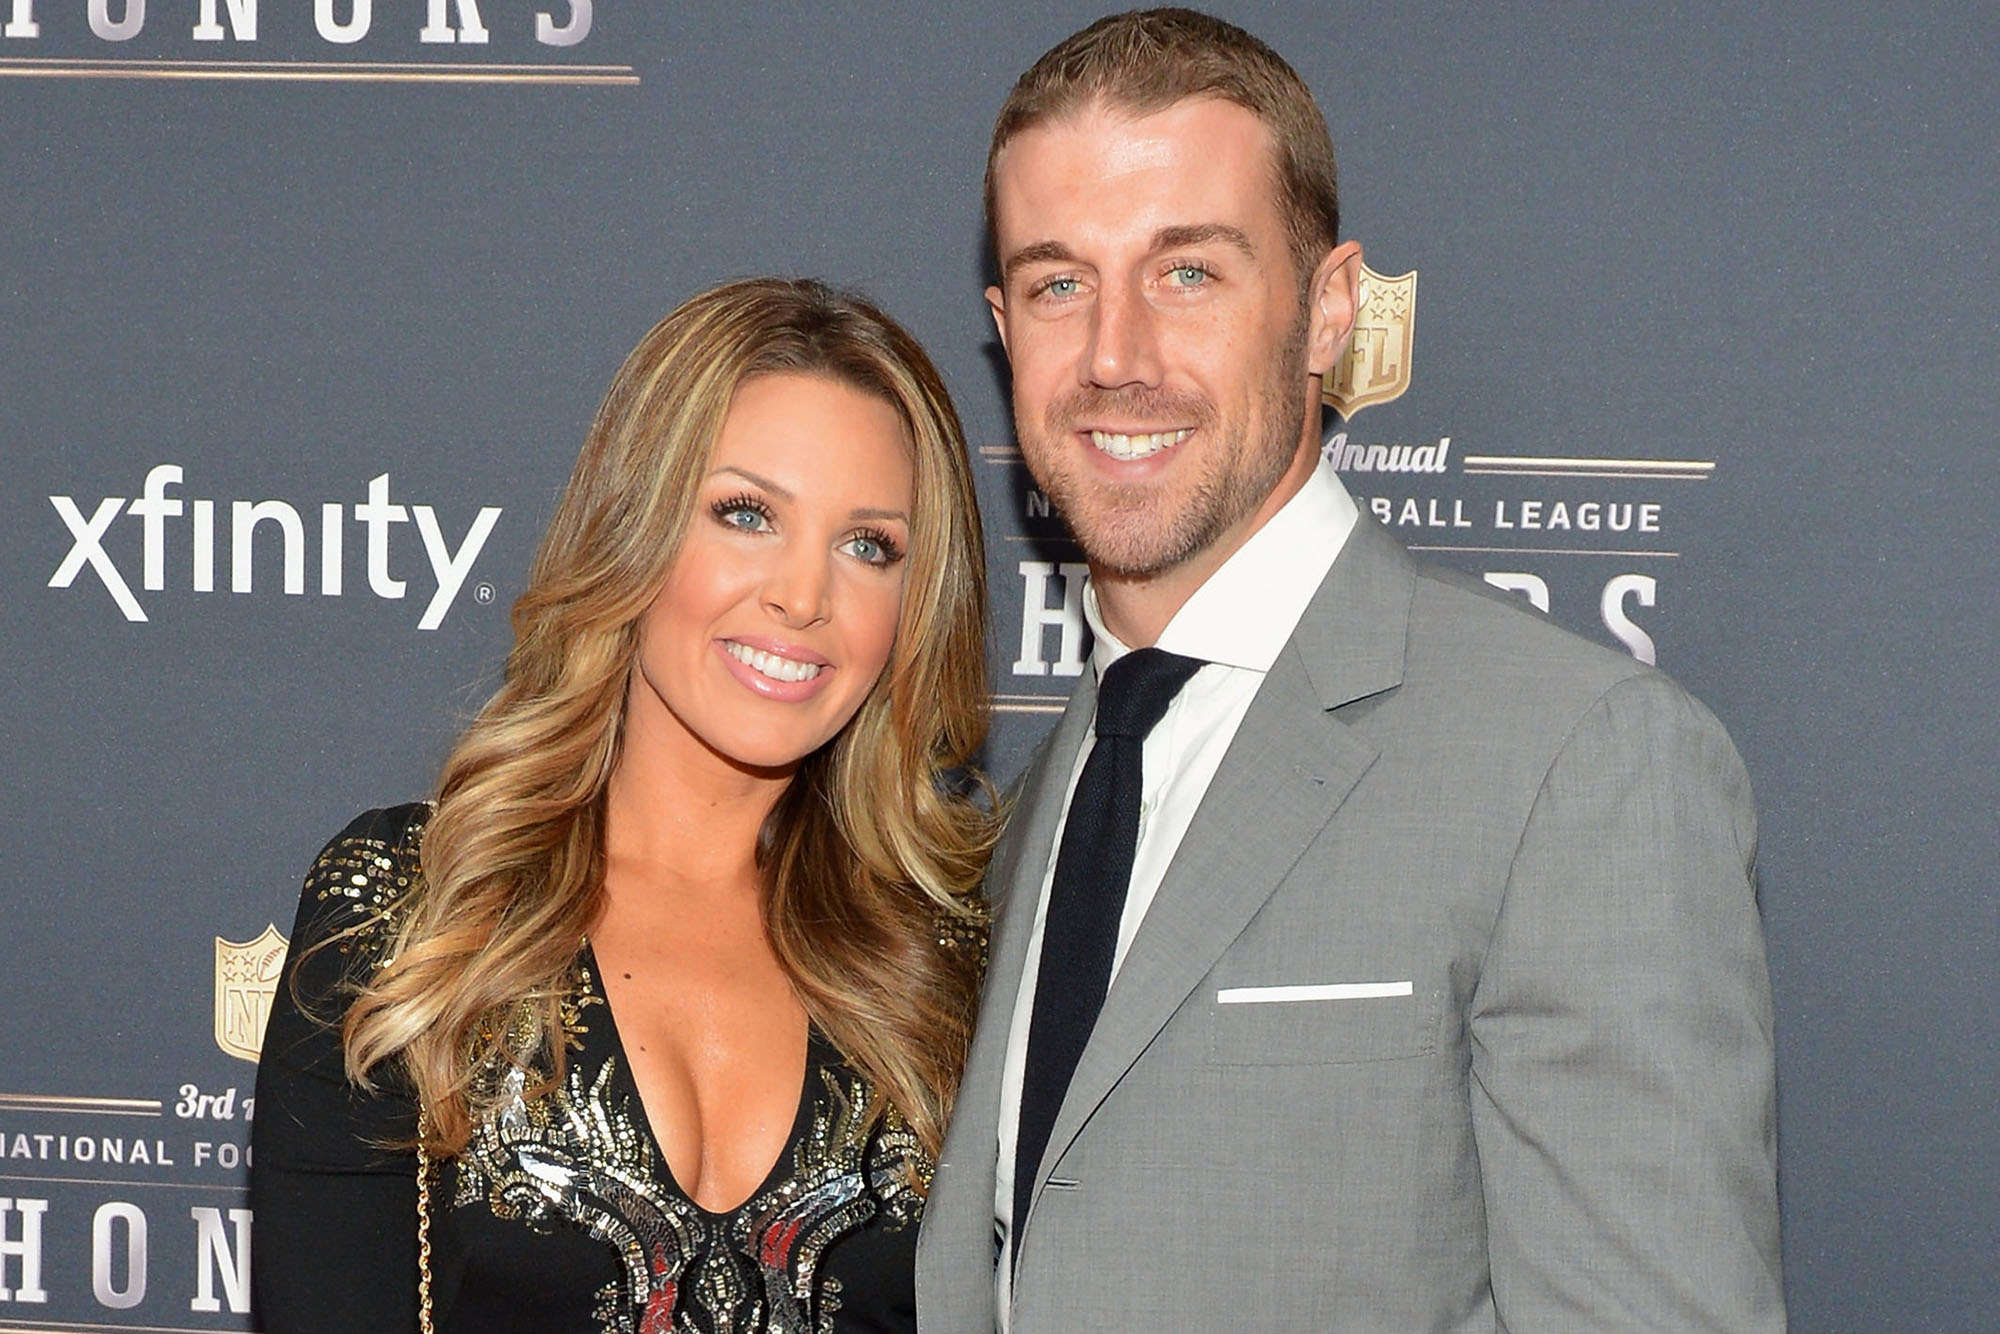 Alex Smith’s wife posts emotional video a year after gruesome injury